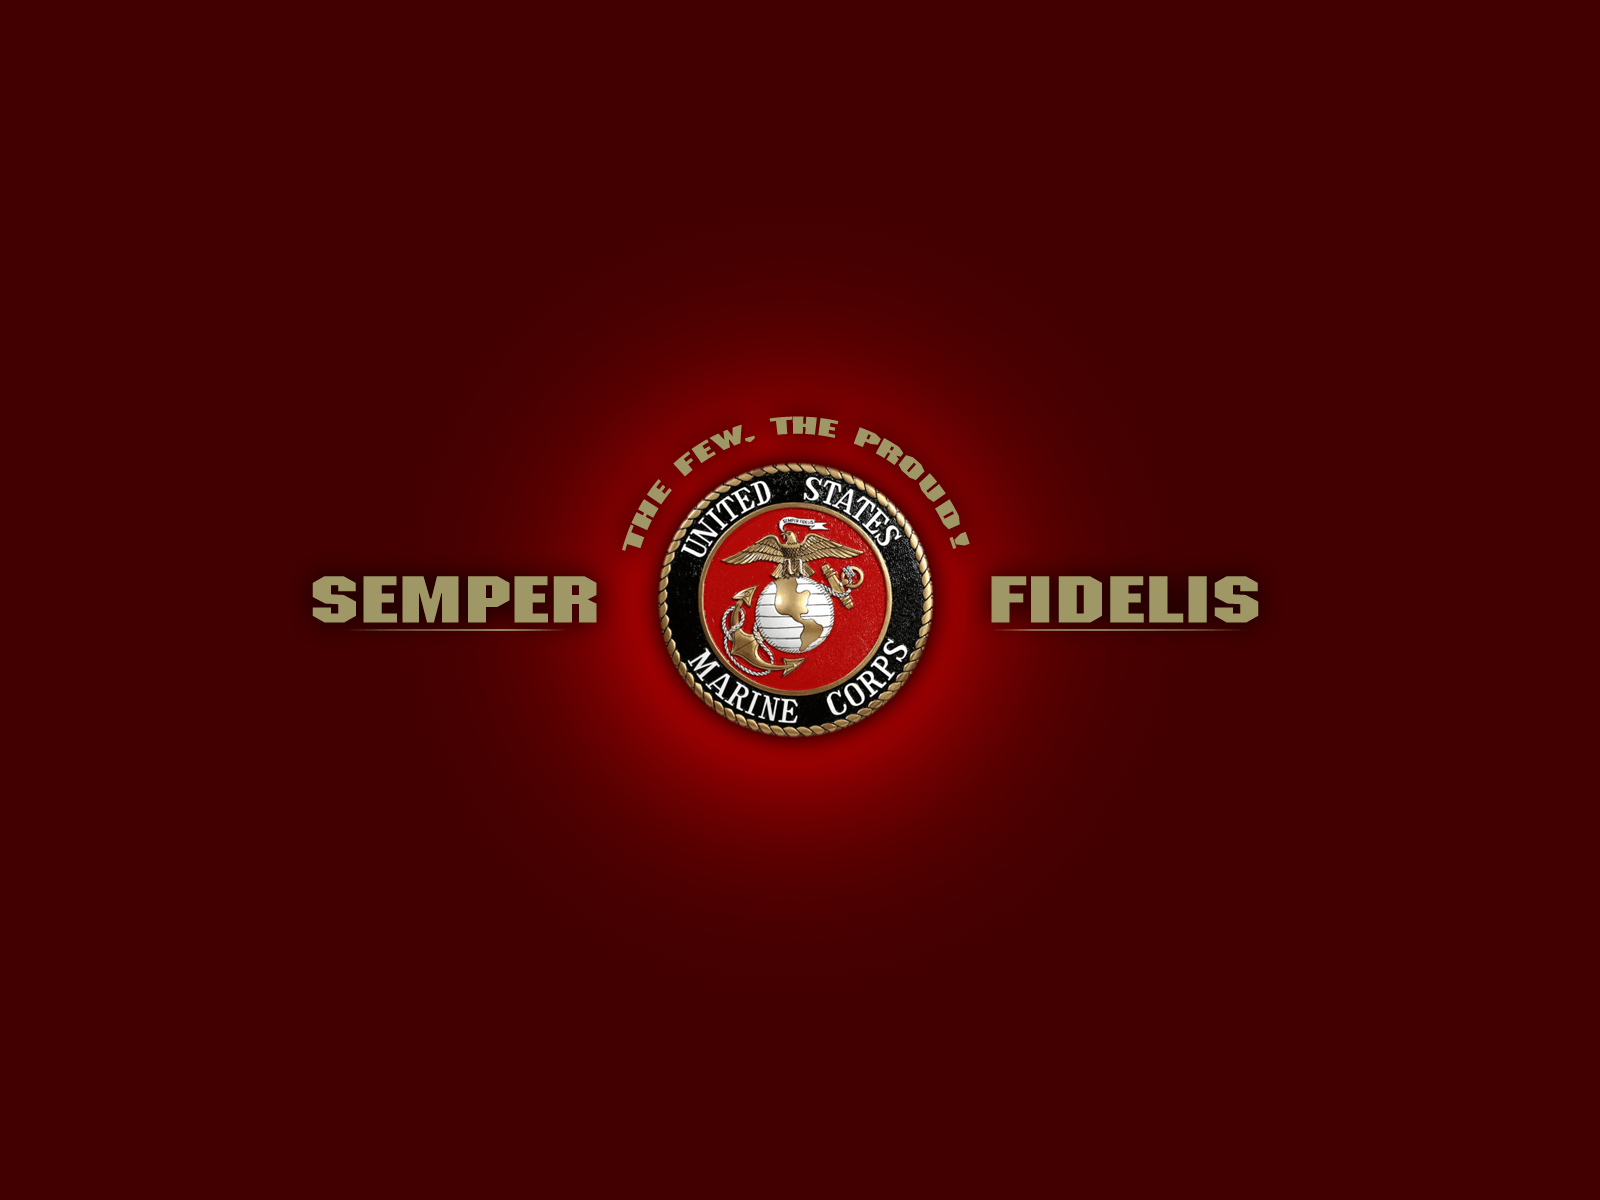 Now you are able to find free US Marines Desktop Wallpaper